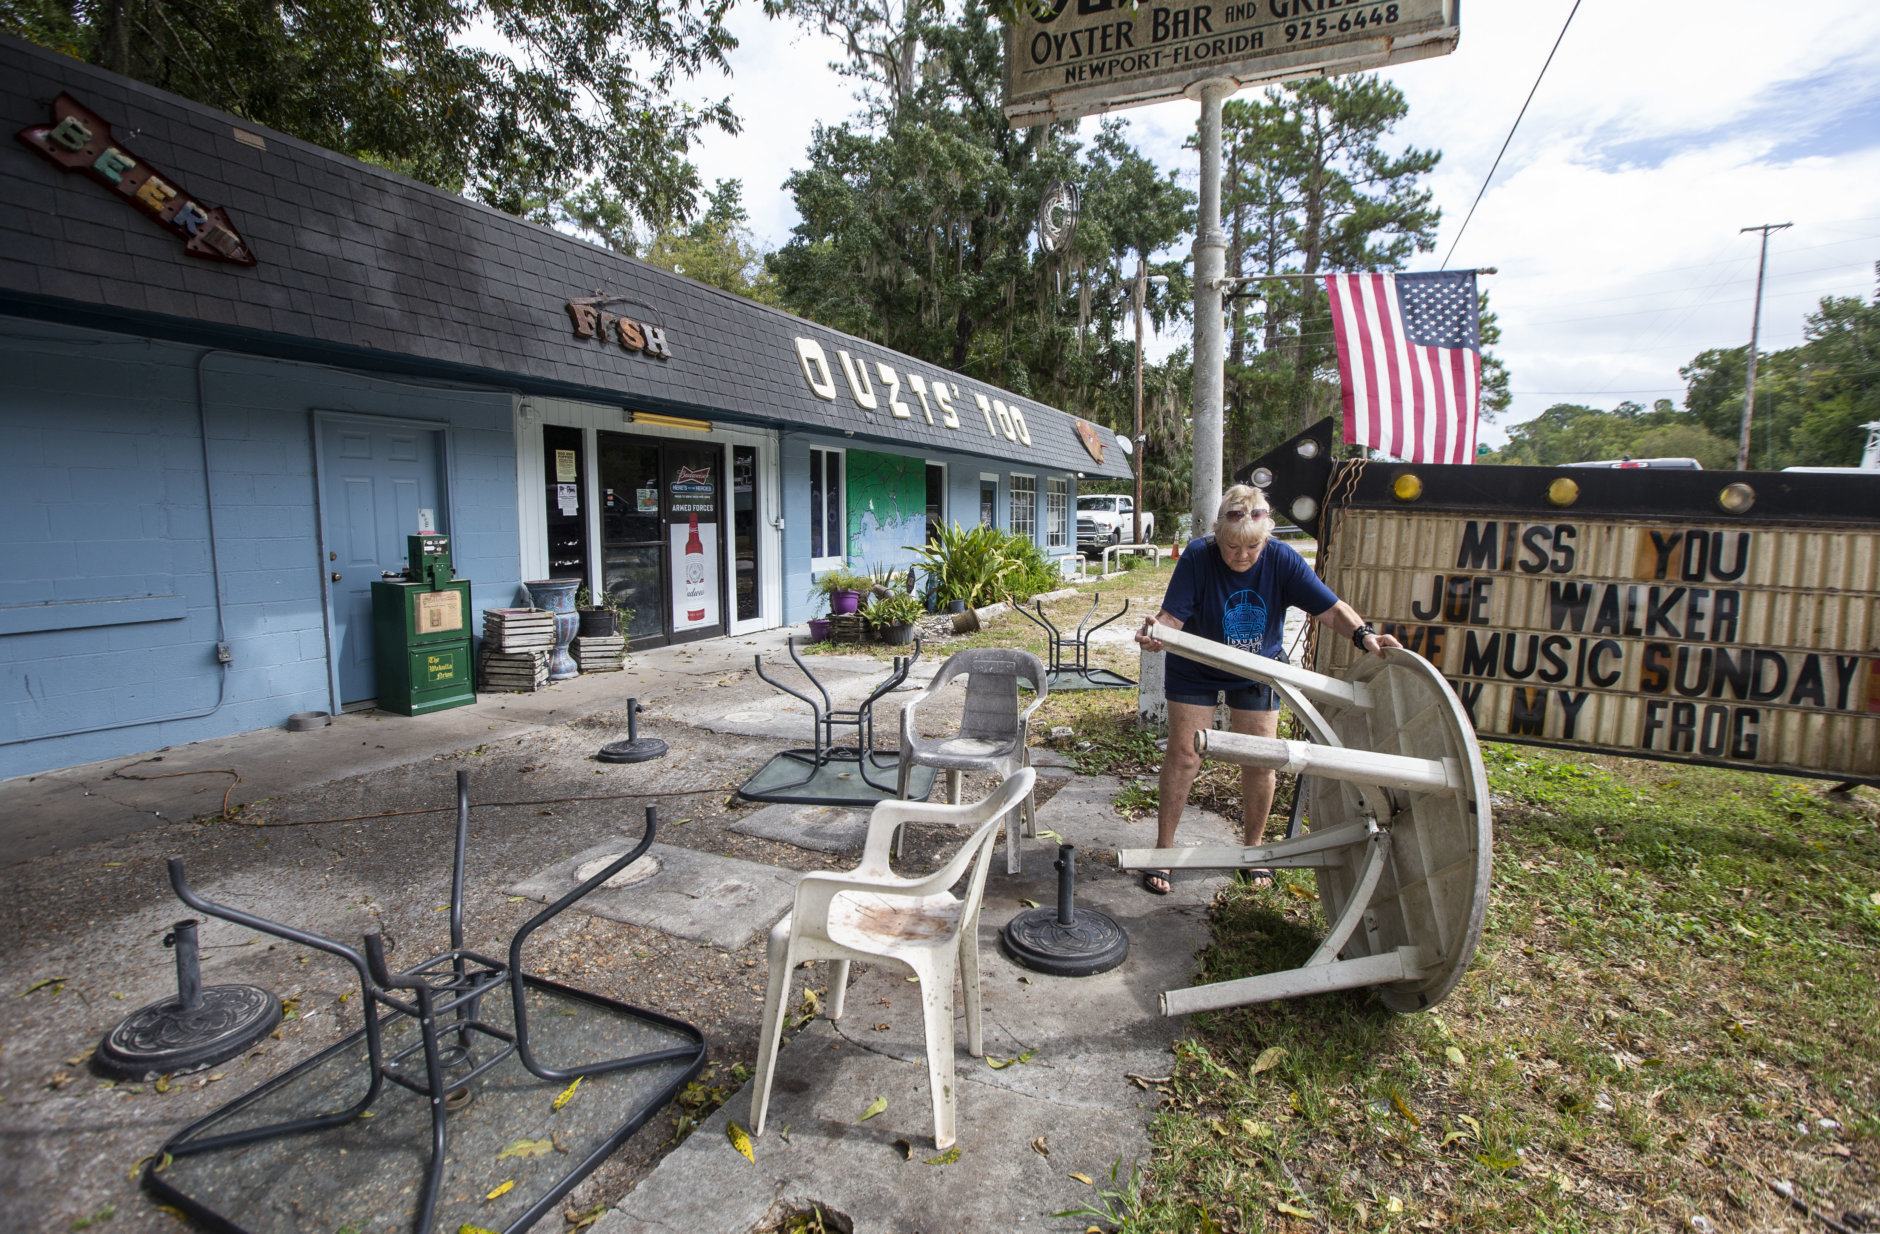 NEWPORT, FL - OCTOBER 09: Bar owner Dorothy White puts away outdoor furniture at Ouzts Too bar prior to the arrival of Hurricane Michael on October 9, 2018 in Newport, Florida. (Photo by Mark Wallheiser/Getty Images)